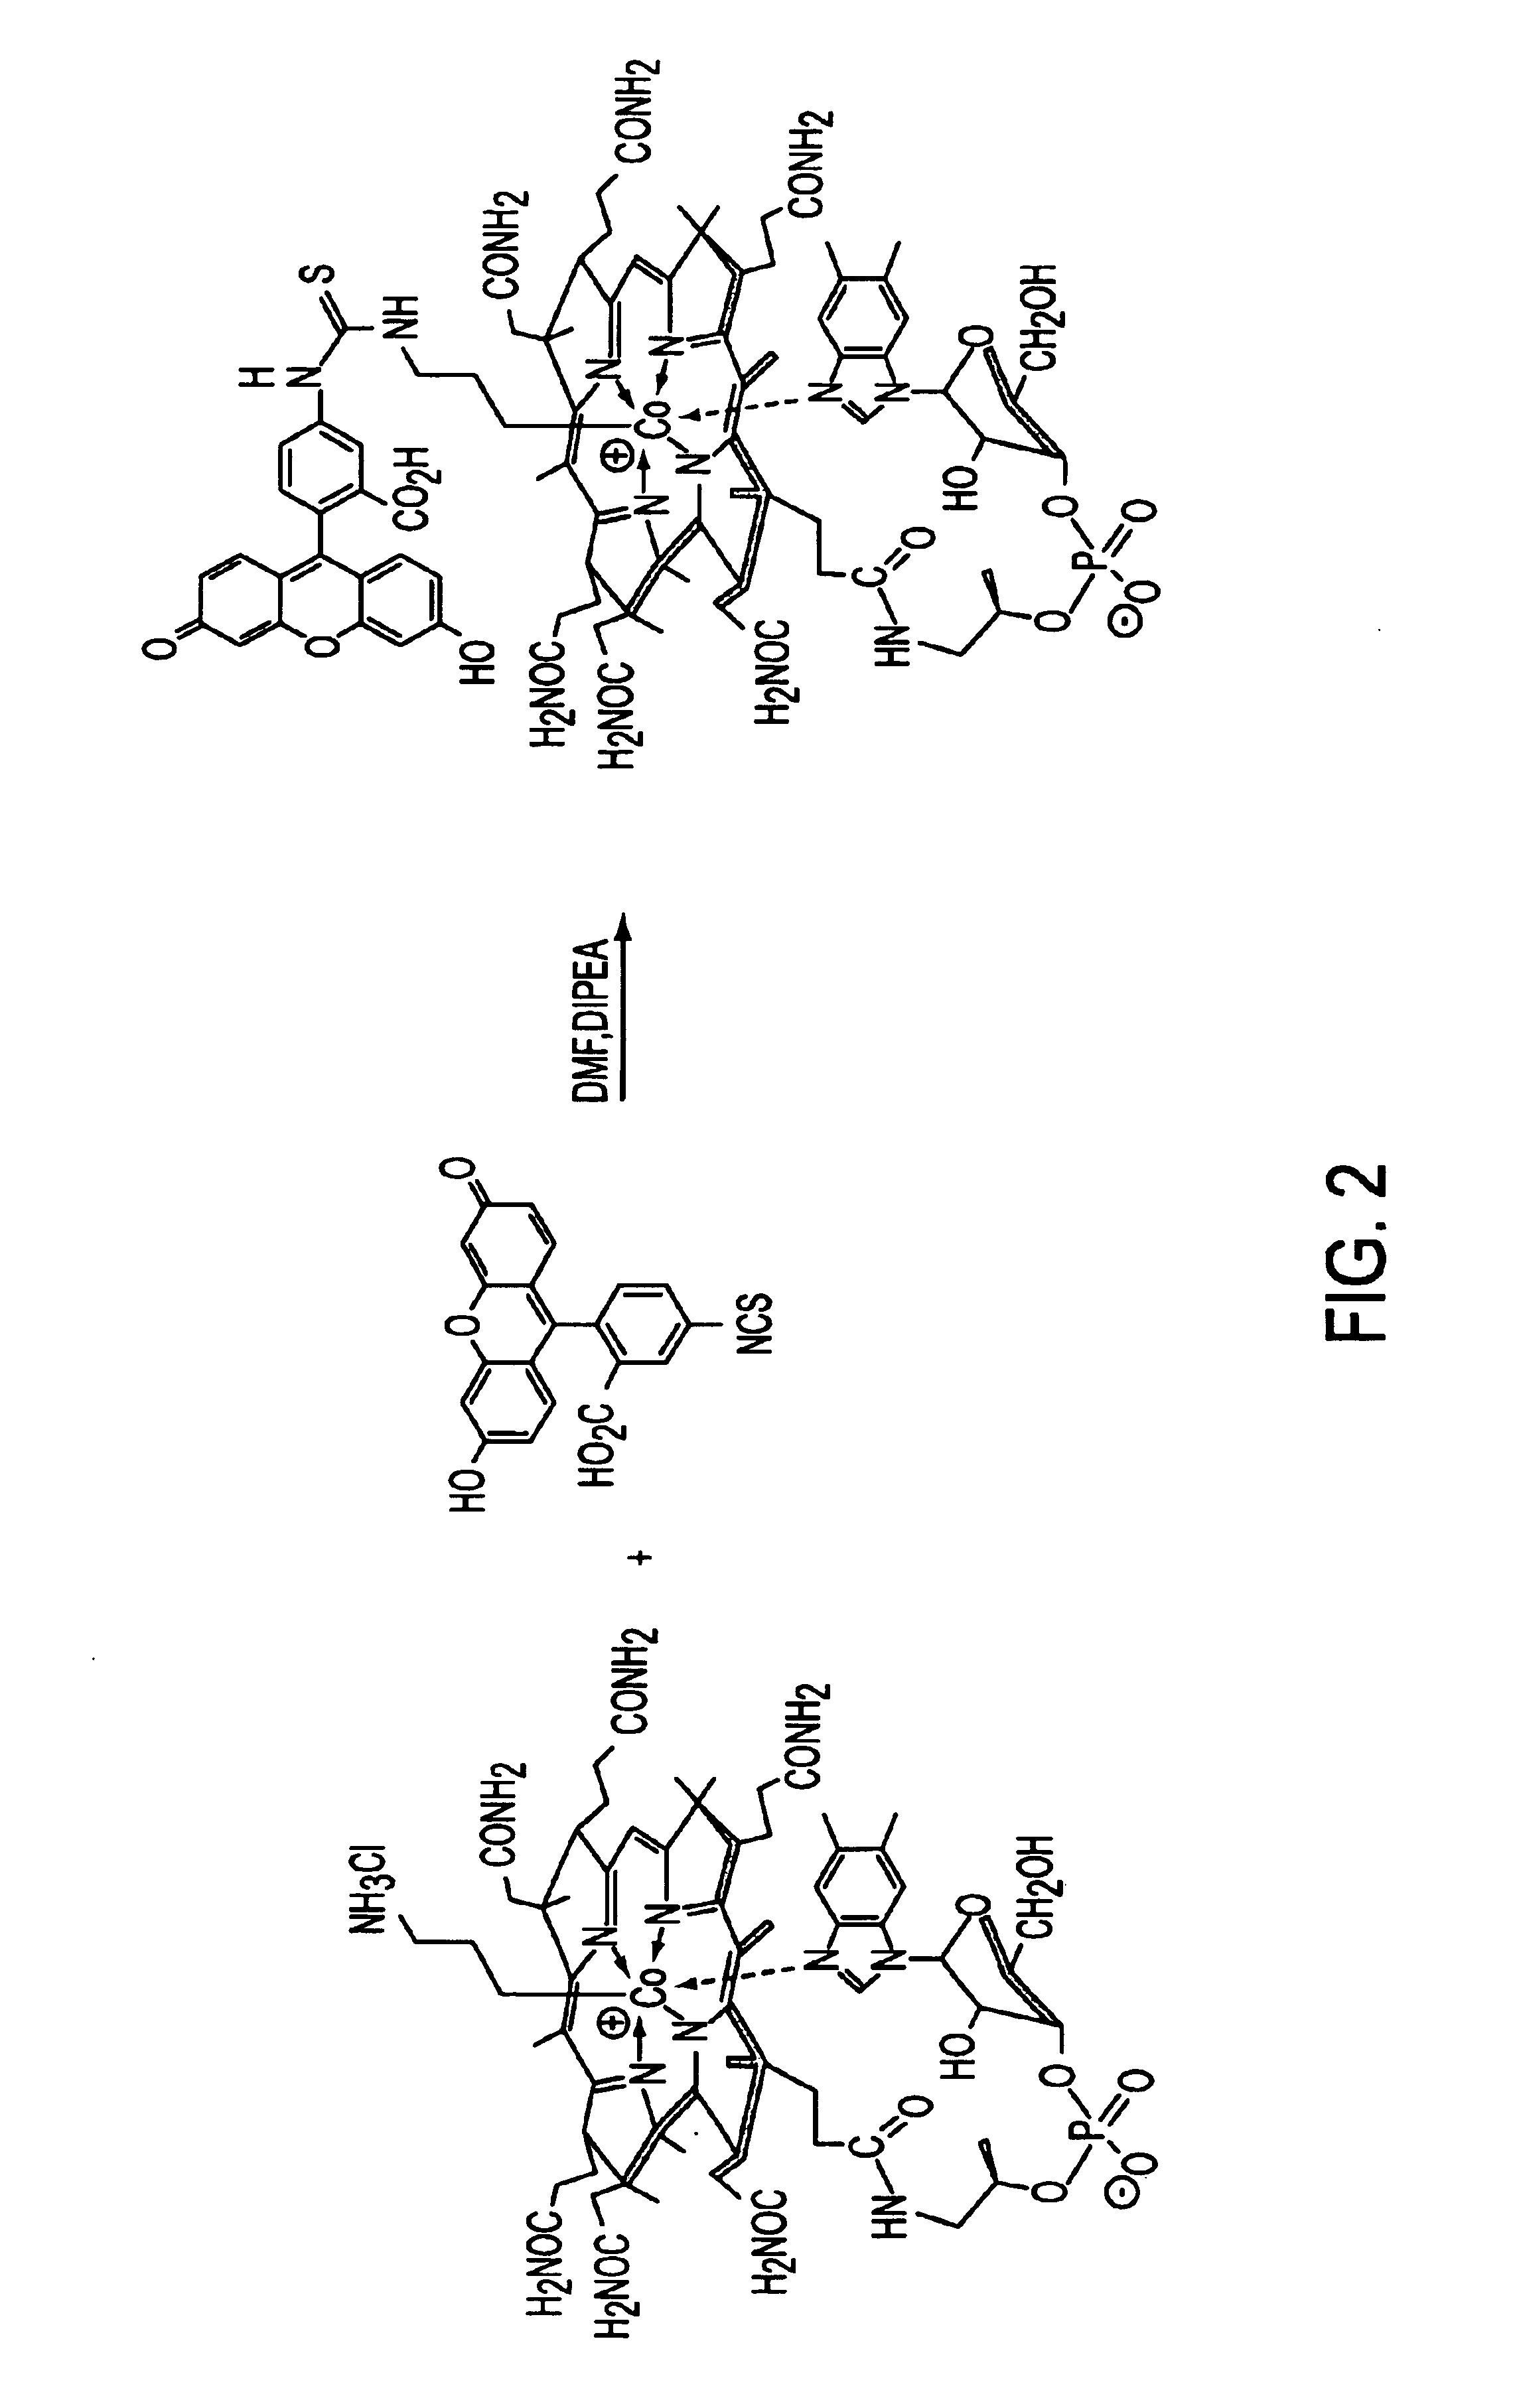 Fluorescent cobalamins and uses thereof